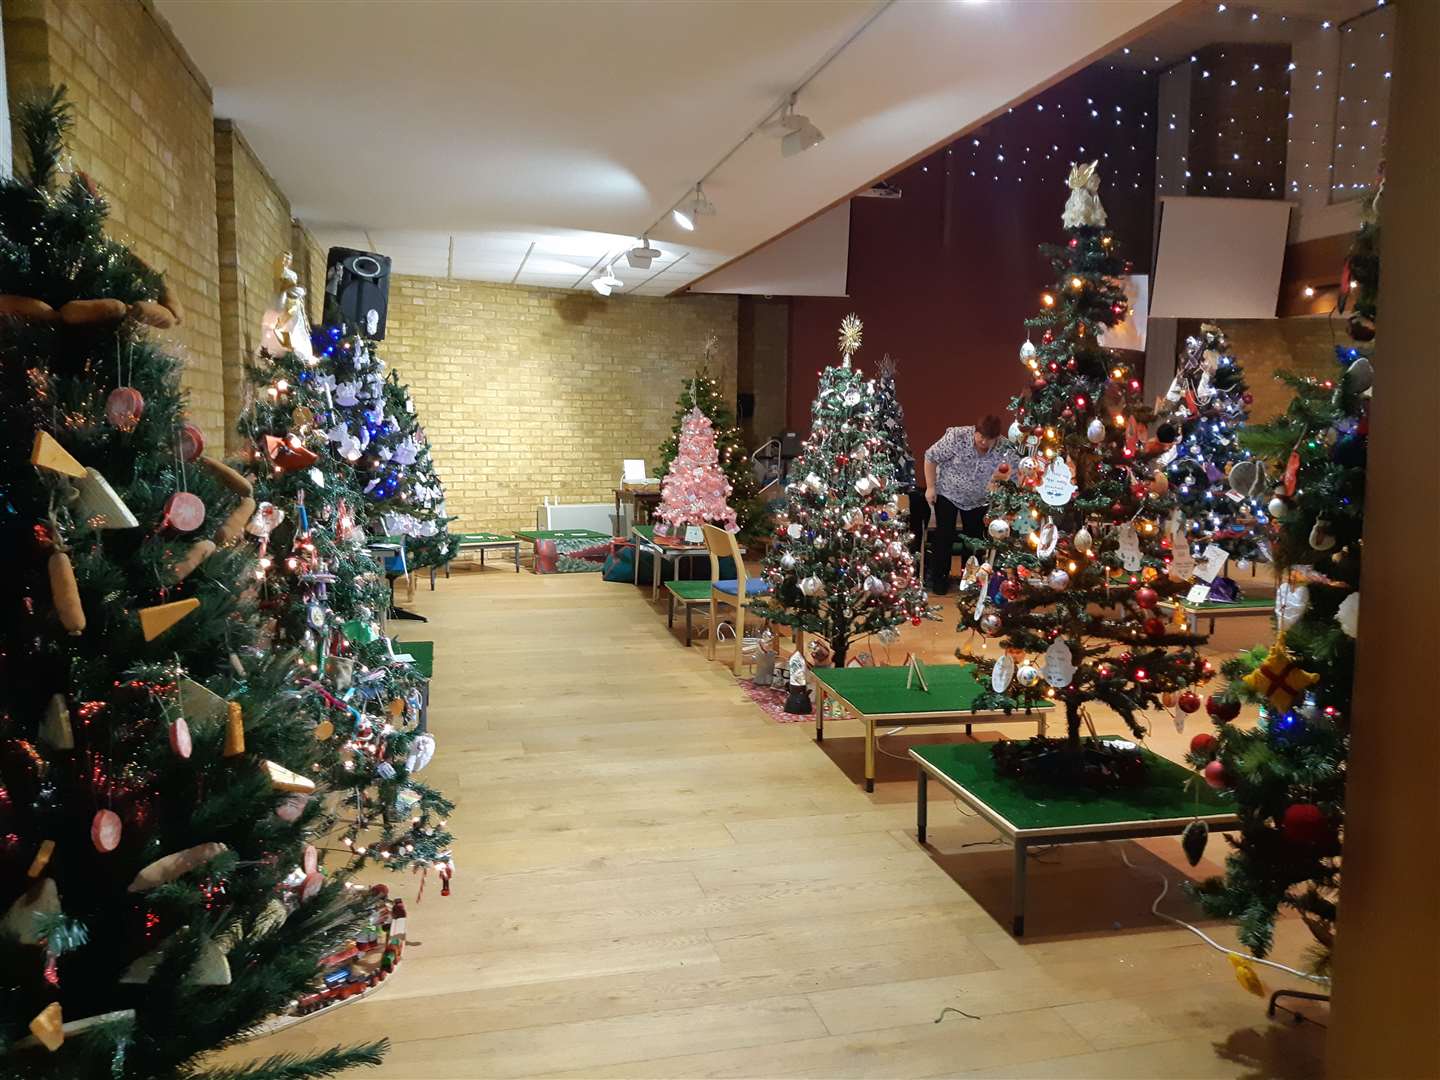 The hall, pictured during set up, will display around 65 trees